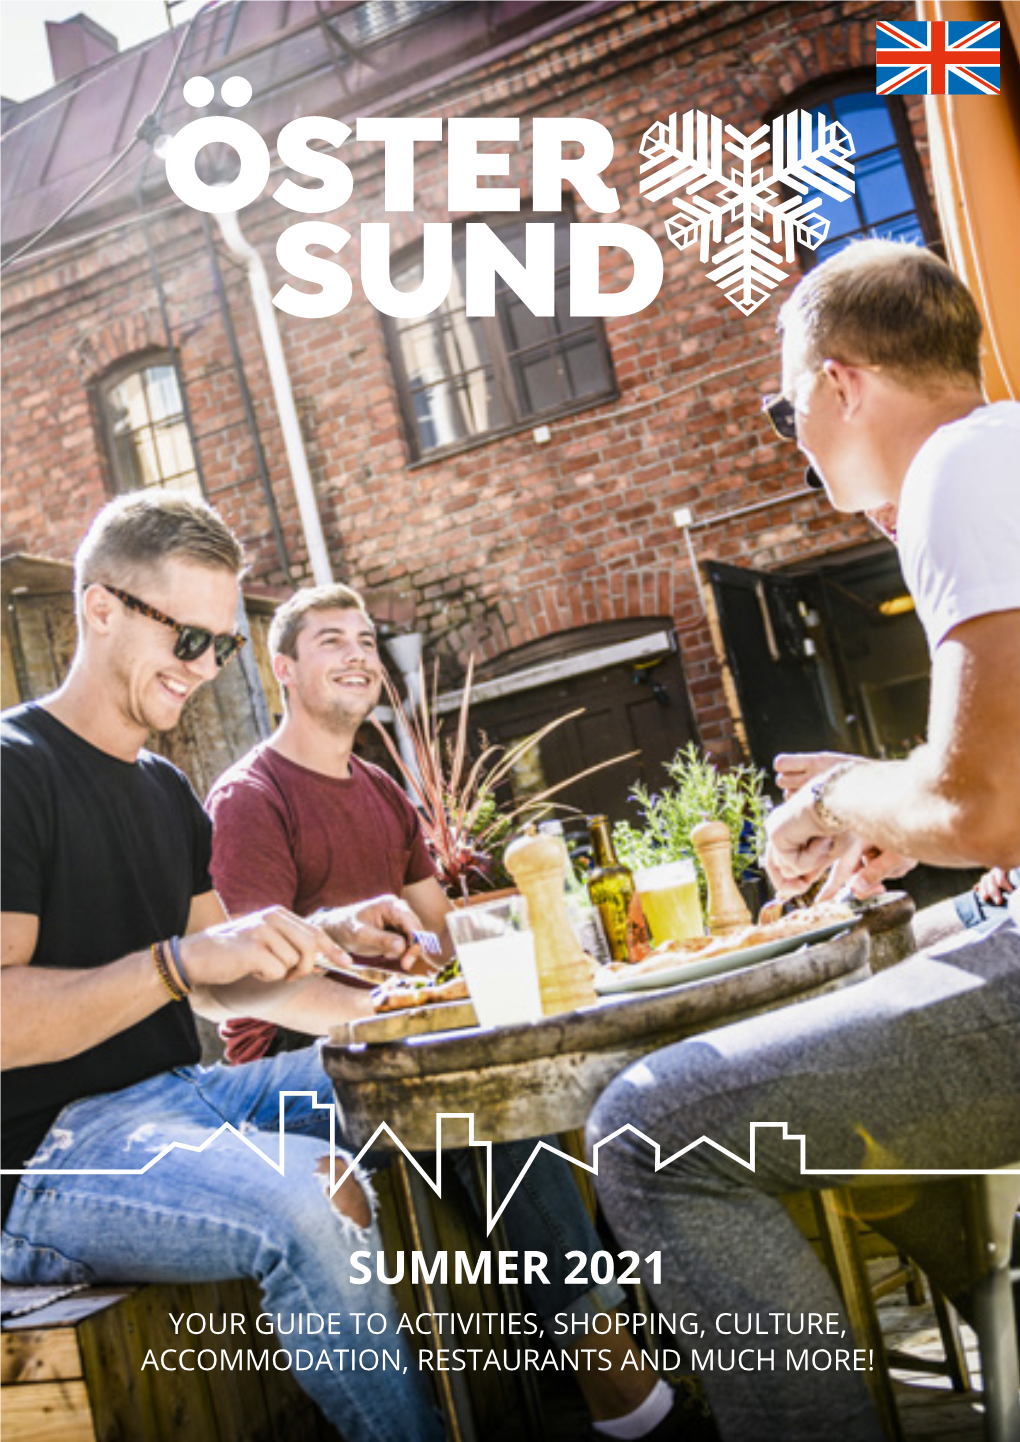 SUMMER 2021 YOUR GUIDE to ACTIVITIES, SHOPPING, CULTURE, ACCOMMODATION, RESTAURANTS and MUCH MORE! Visitostersund.Se 1 WELCOME to US! Parksommar